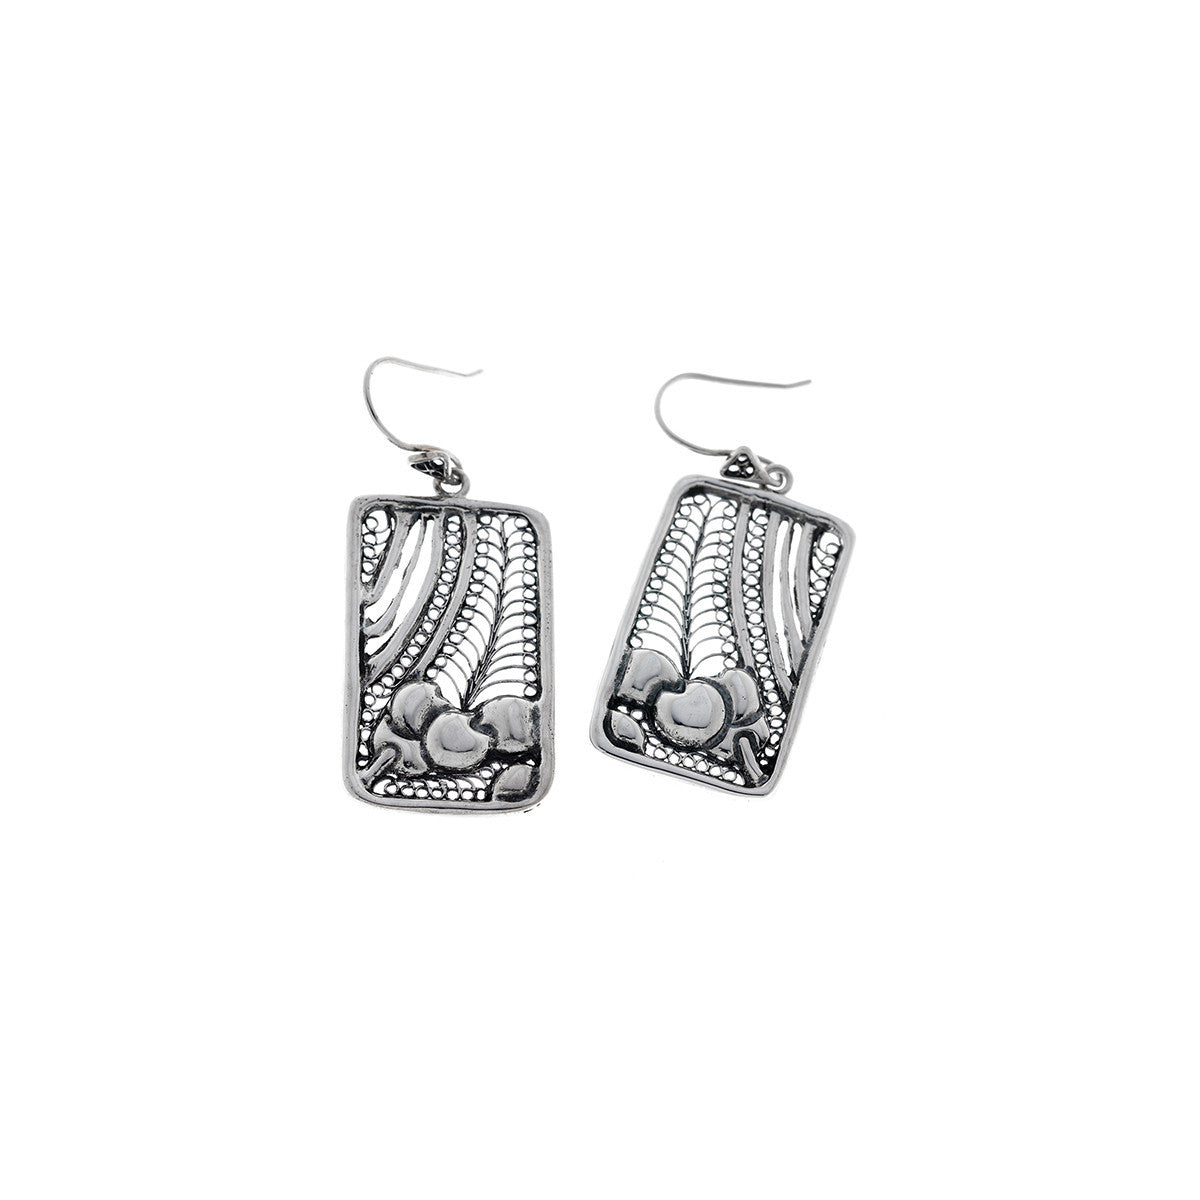 Belle Nouveau Sterling Silver Rectangle Drop Earring - Cynthia Gale New York Jewelry